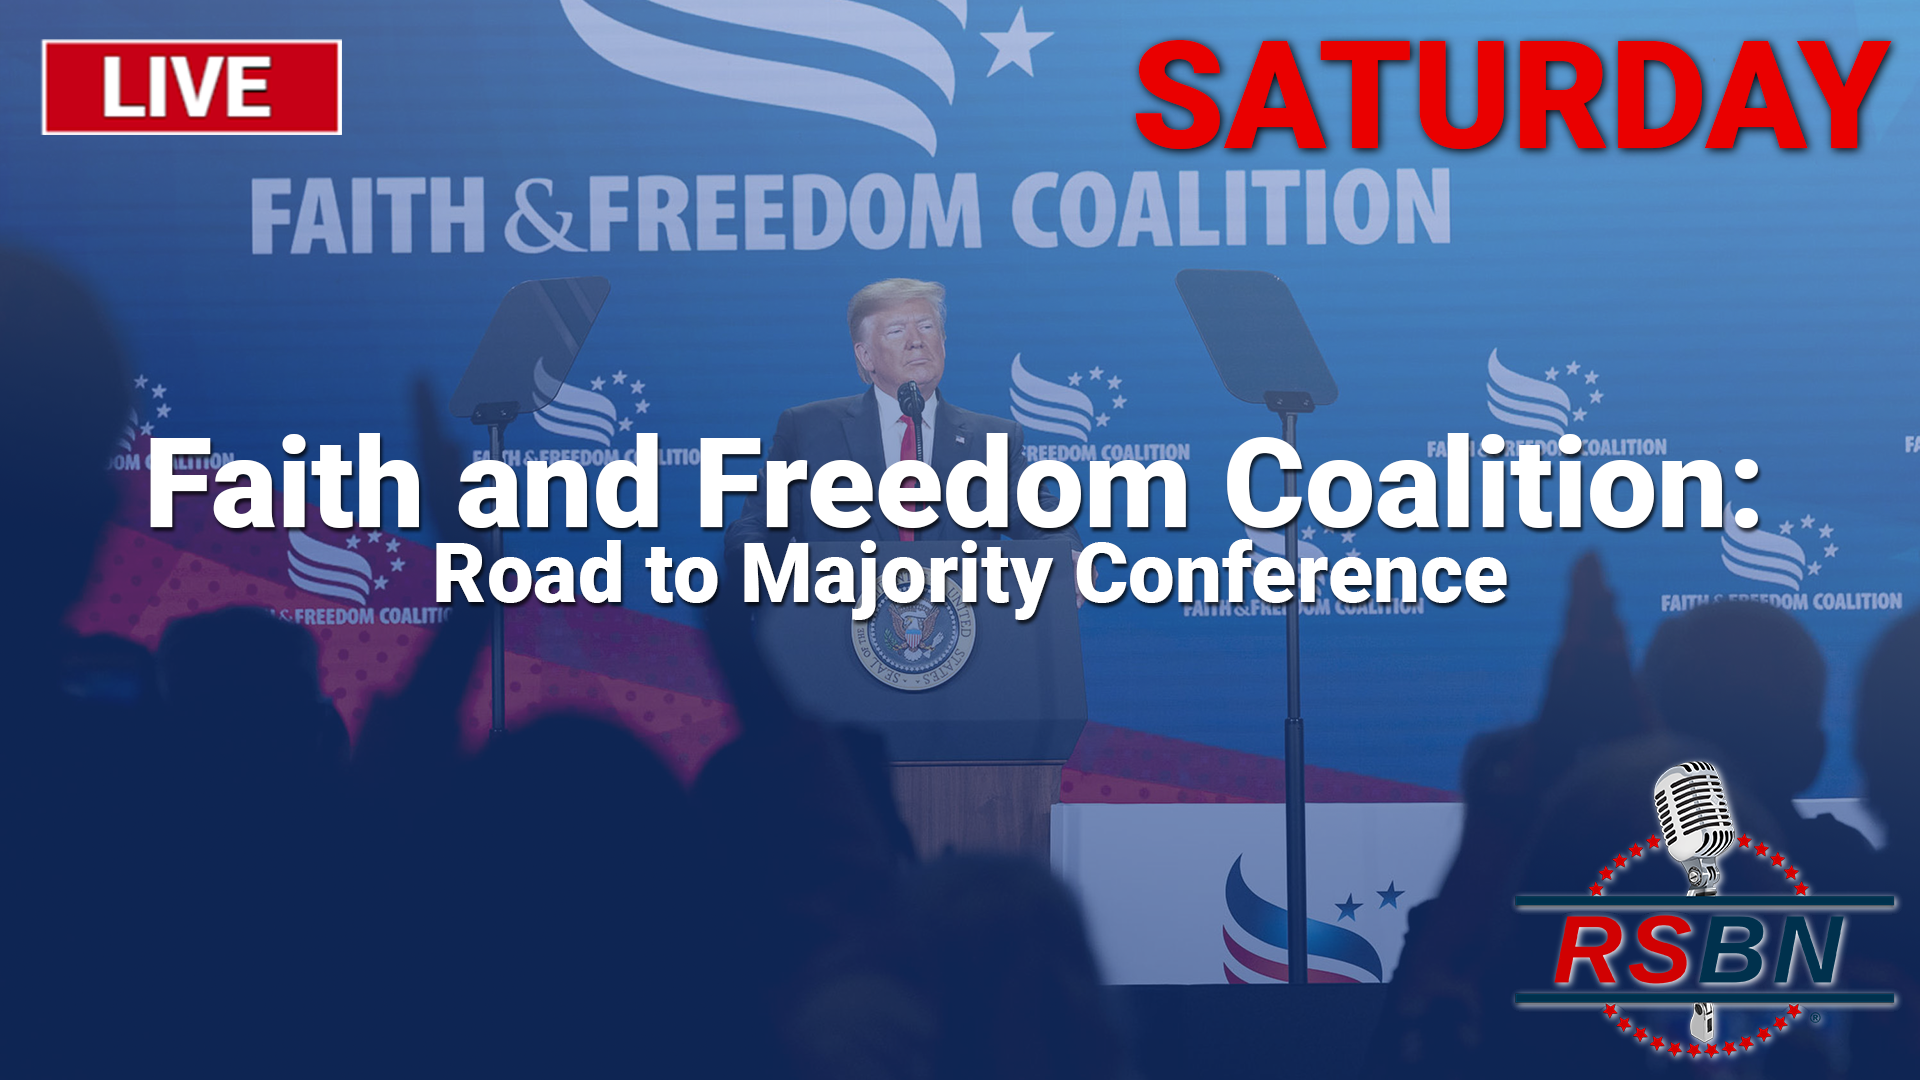 LIVE SATURDAY Faith and Freedom Coalition Road to Majority Conference